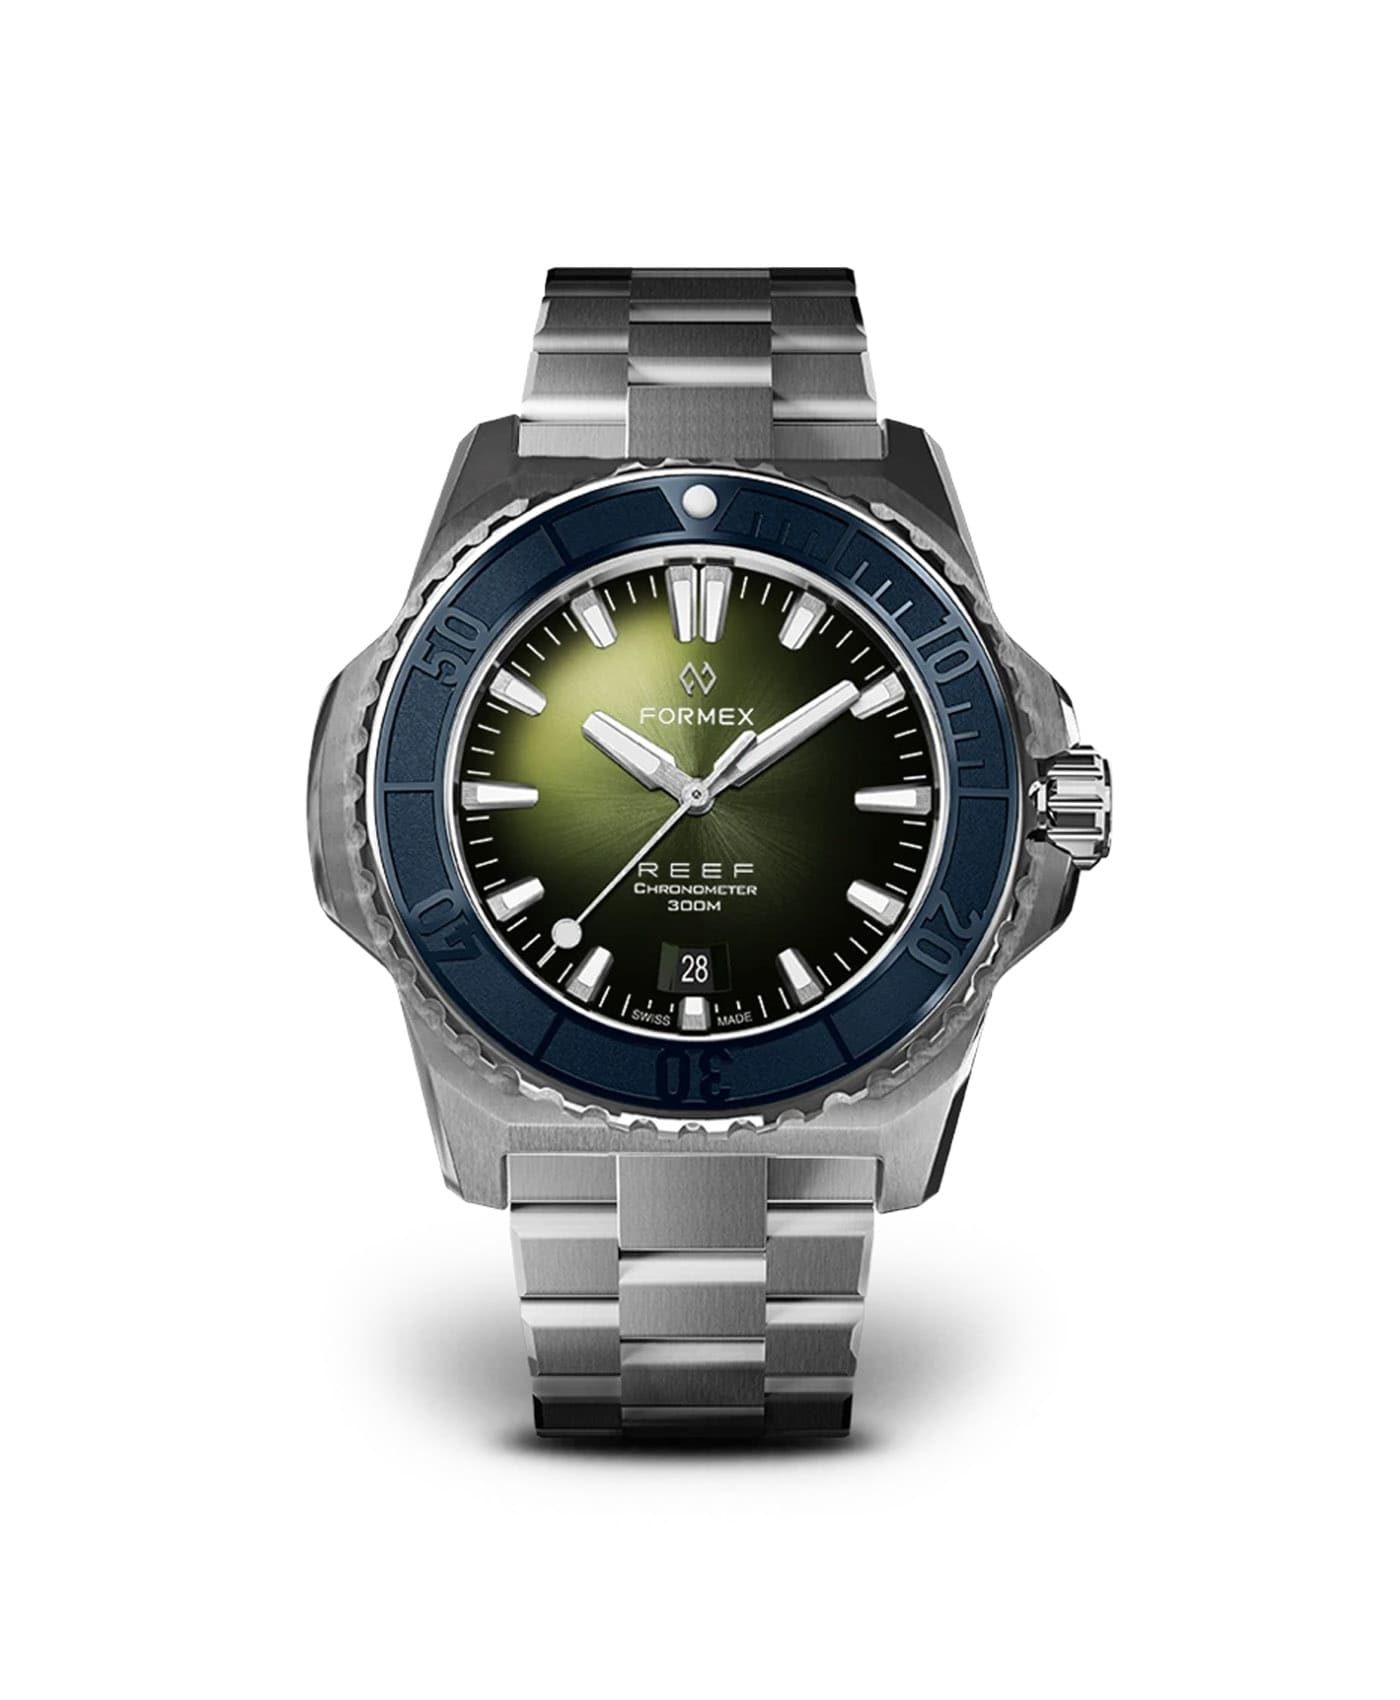 Formex - Reef - Automatic Chronometer COSC 300m_Green Dial Blue Bezel